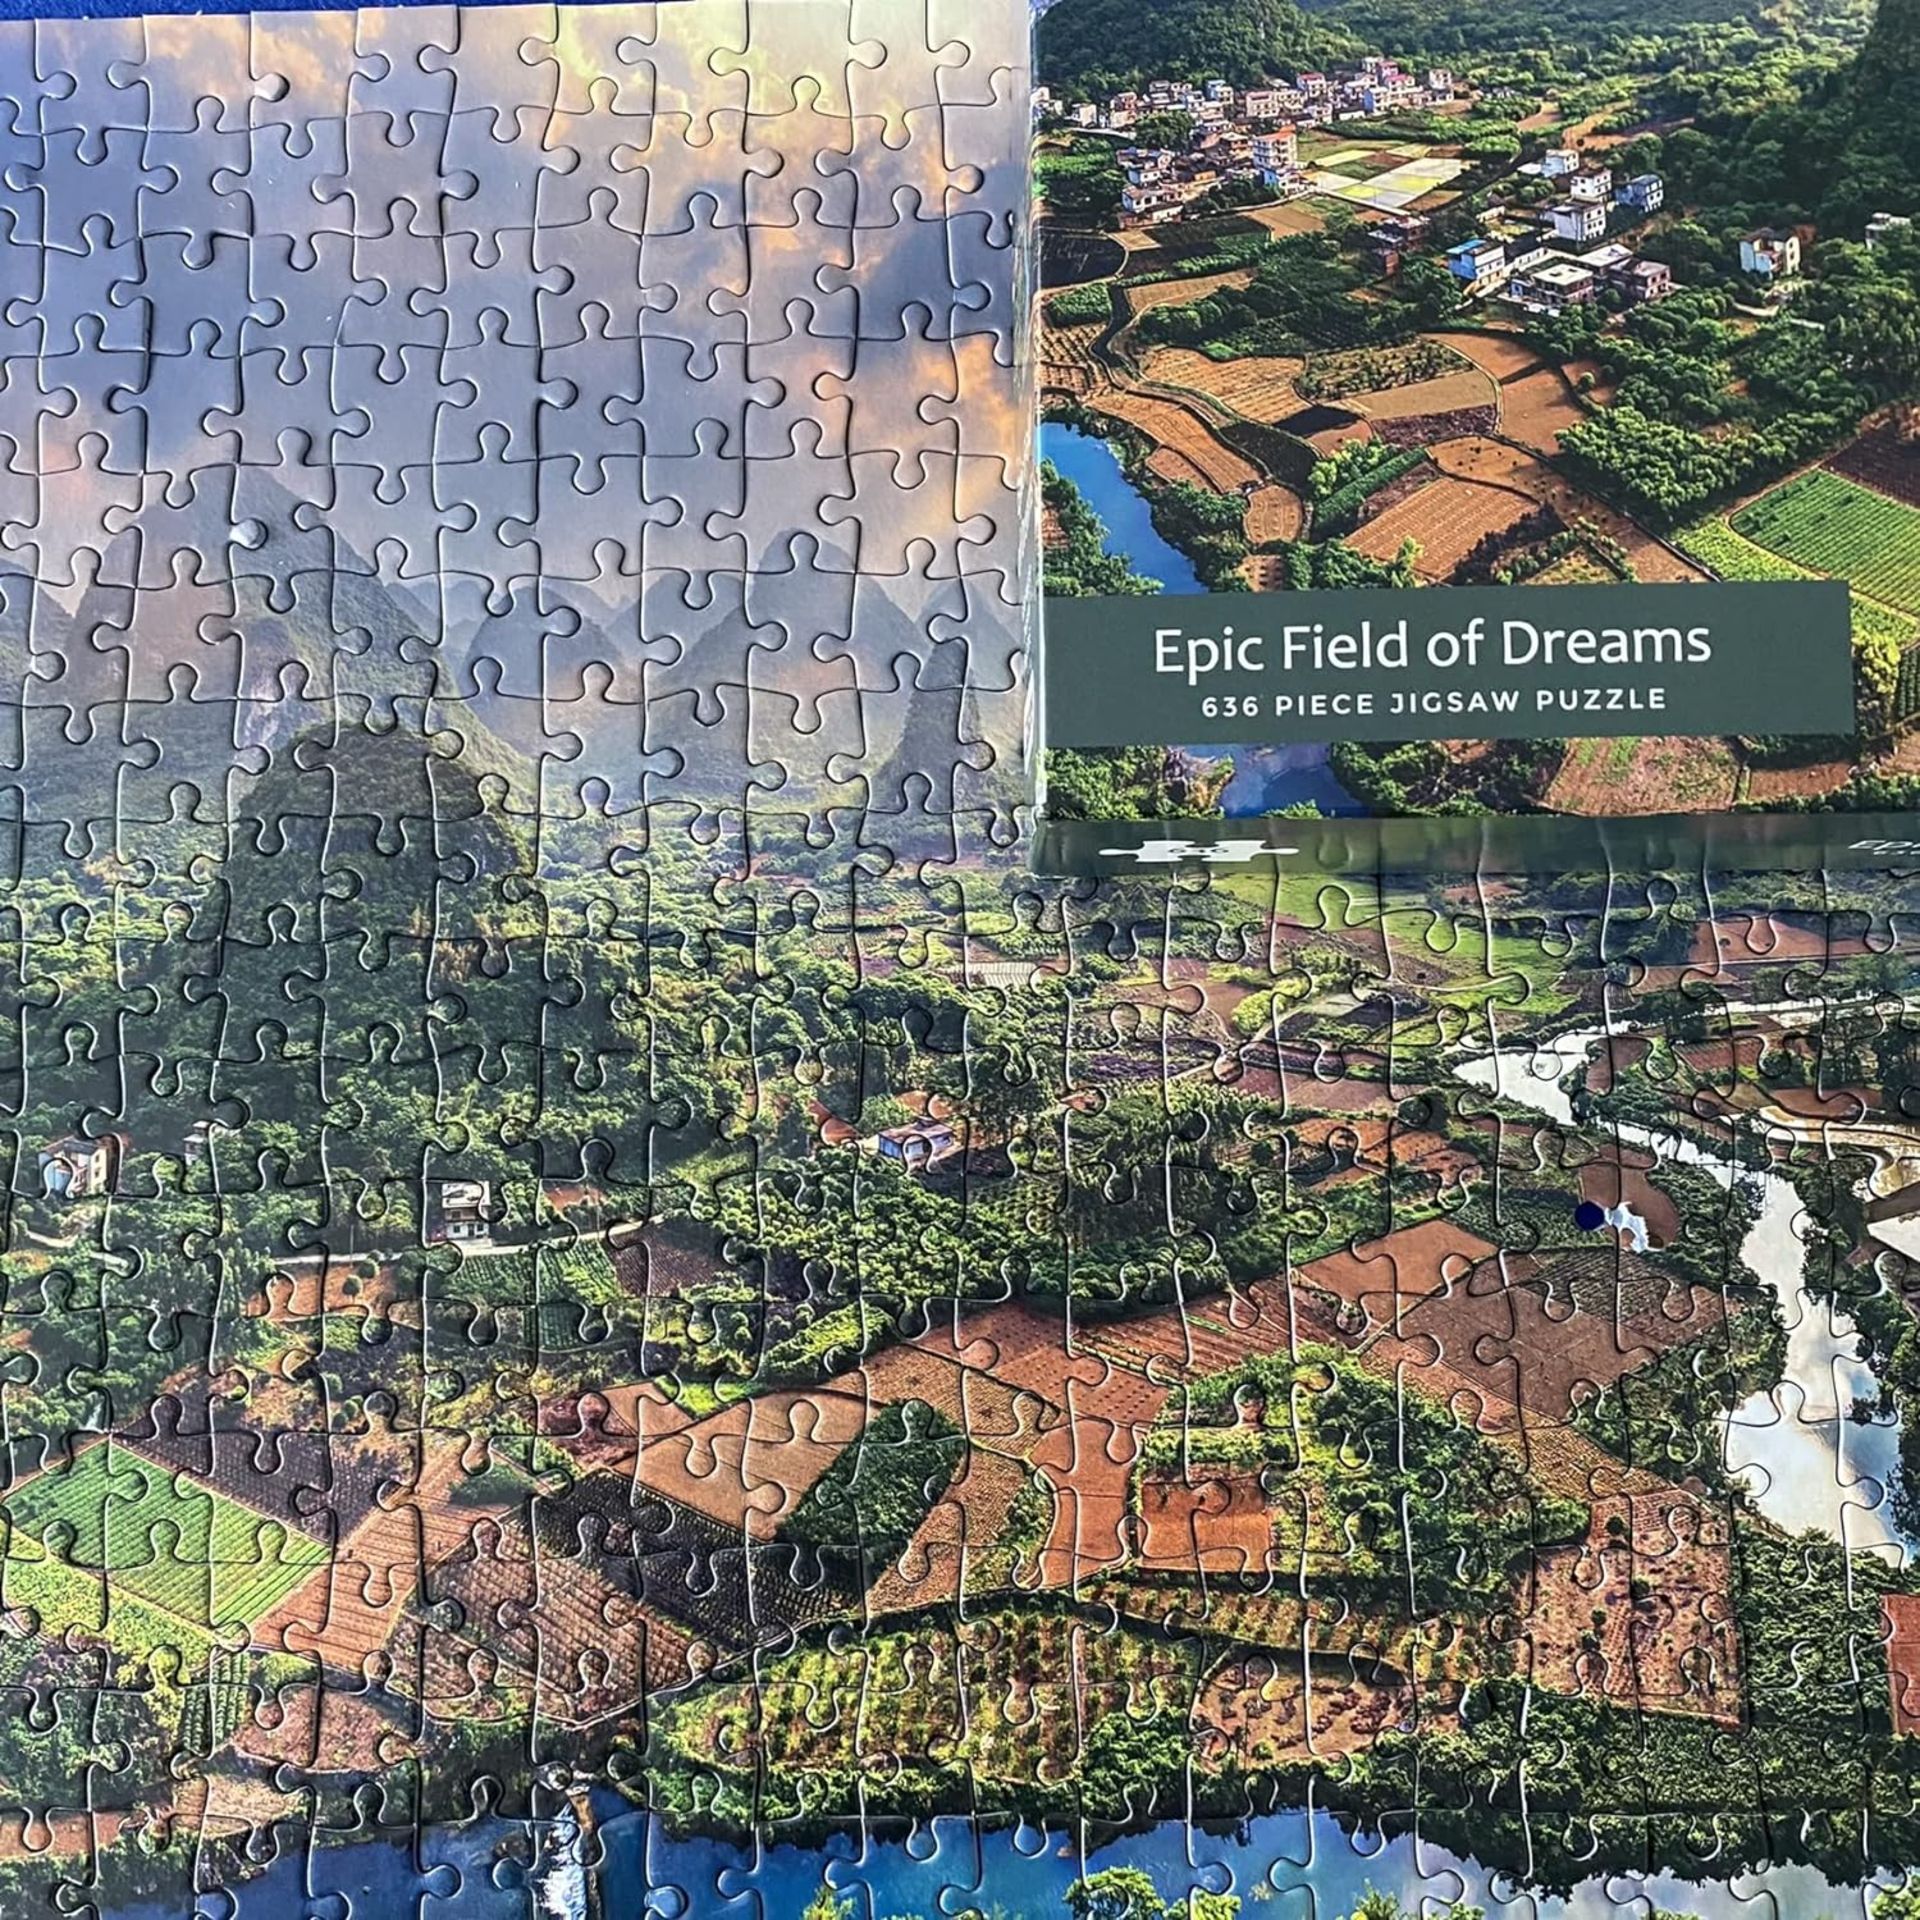 45 X NEW EPIC FIELD OF DREAMS PUZZLE (636 PR) - Image 4 of 8